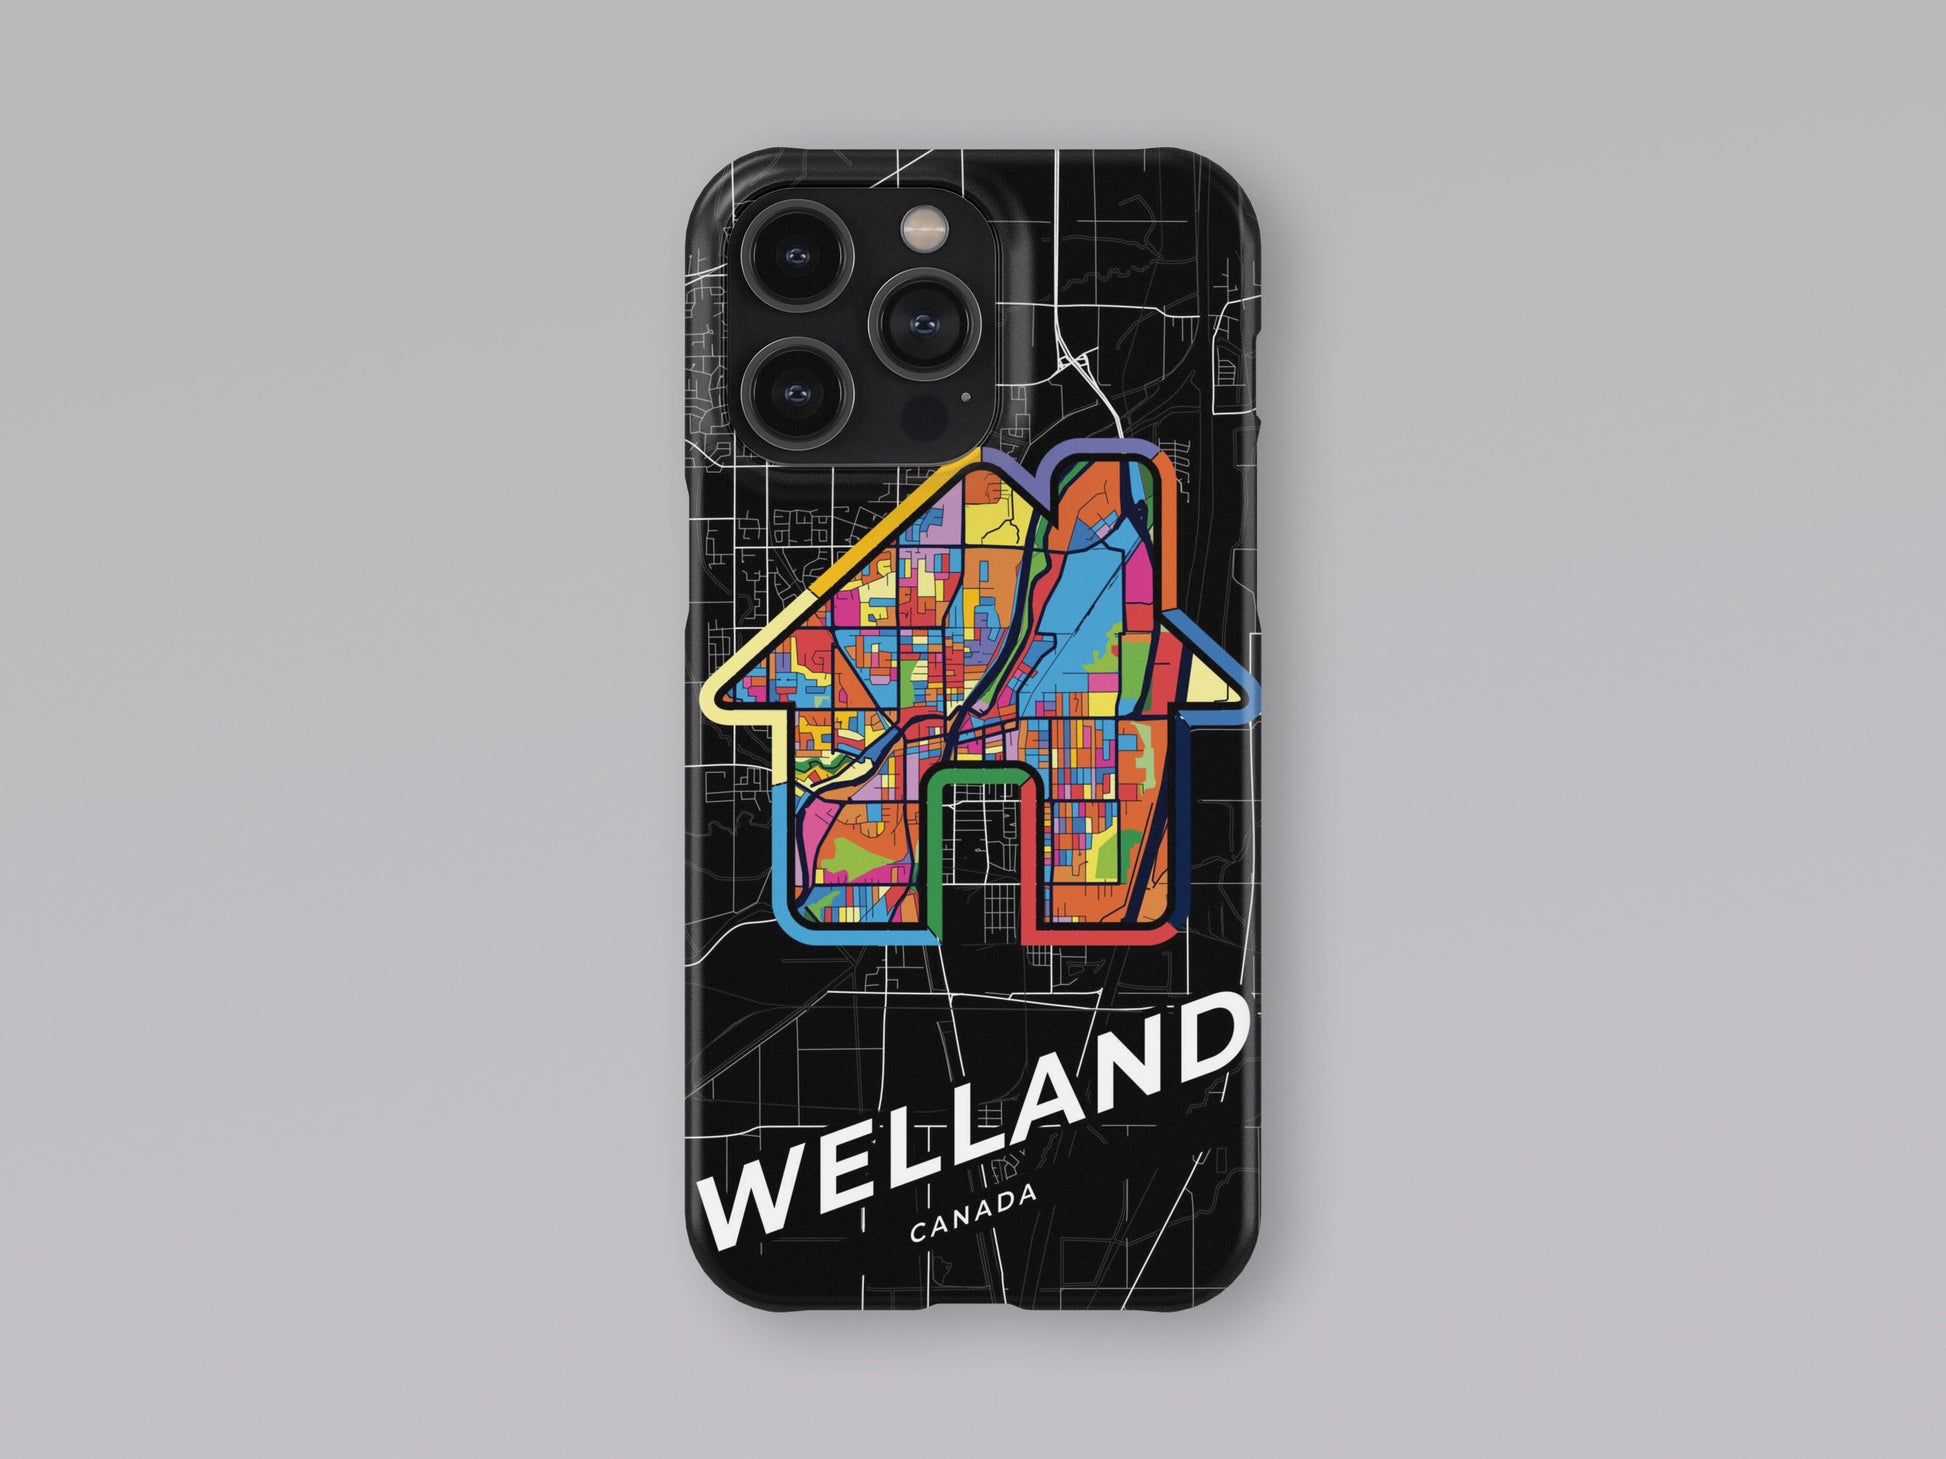 Welland Canada slim phone case with colorful icon 3